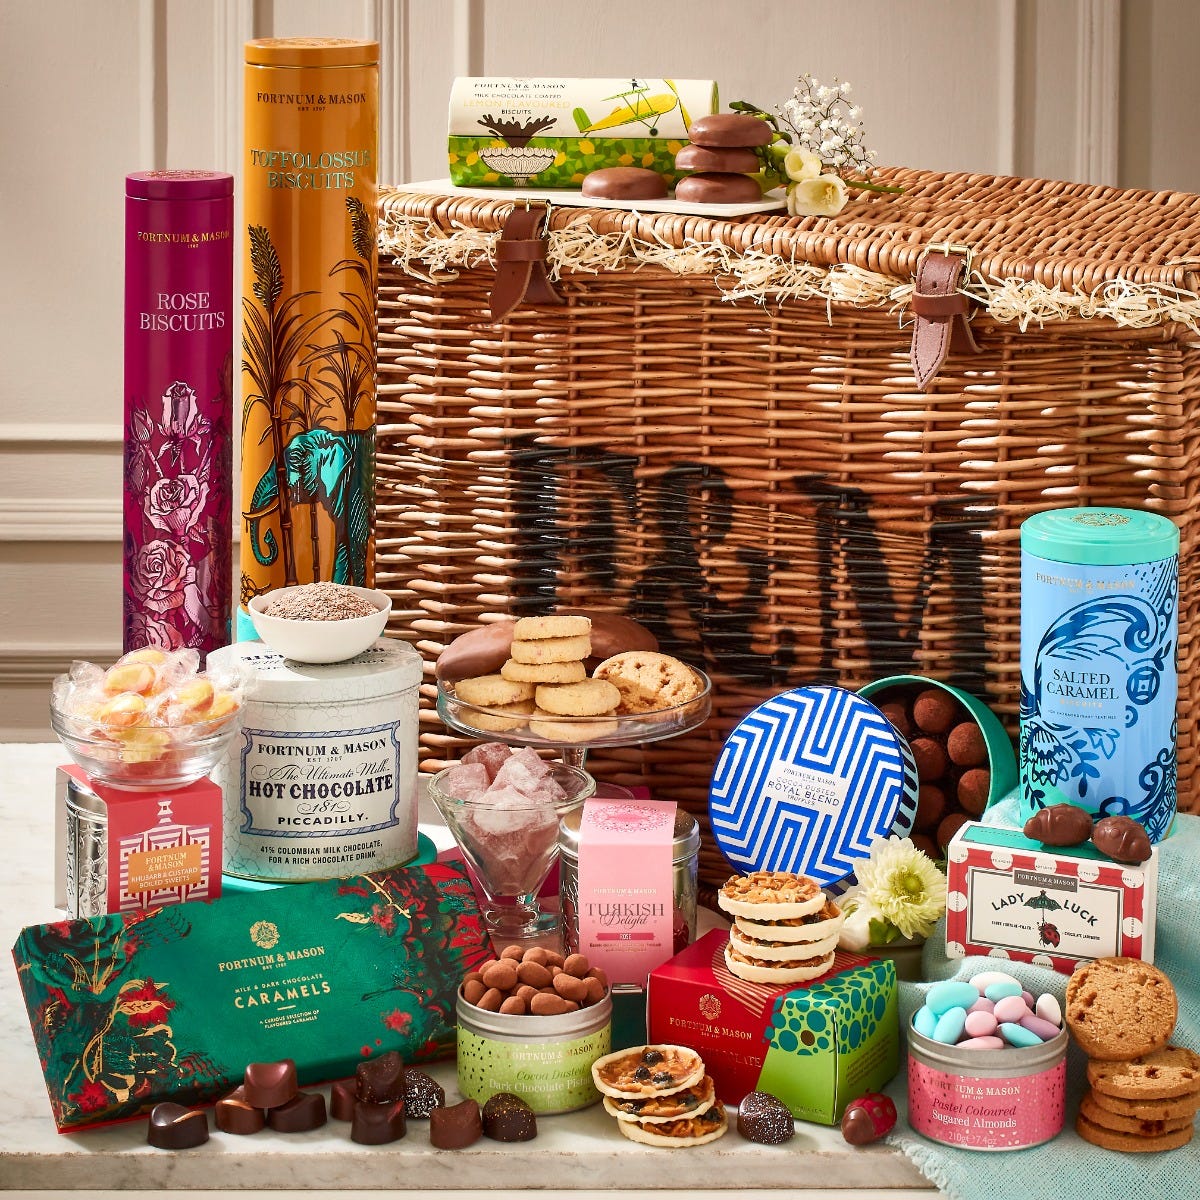 The Confection Perfection Hamper, Biscuits, Chocolates, Fortnum & Mason